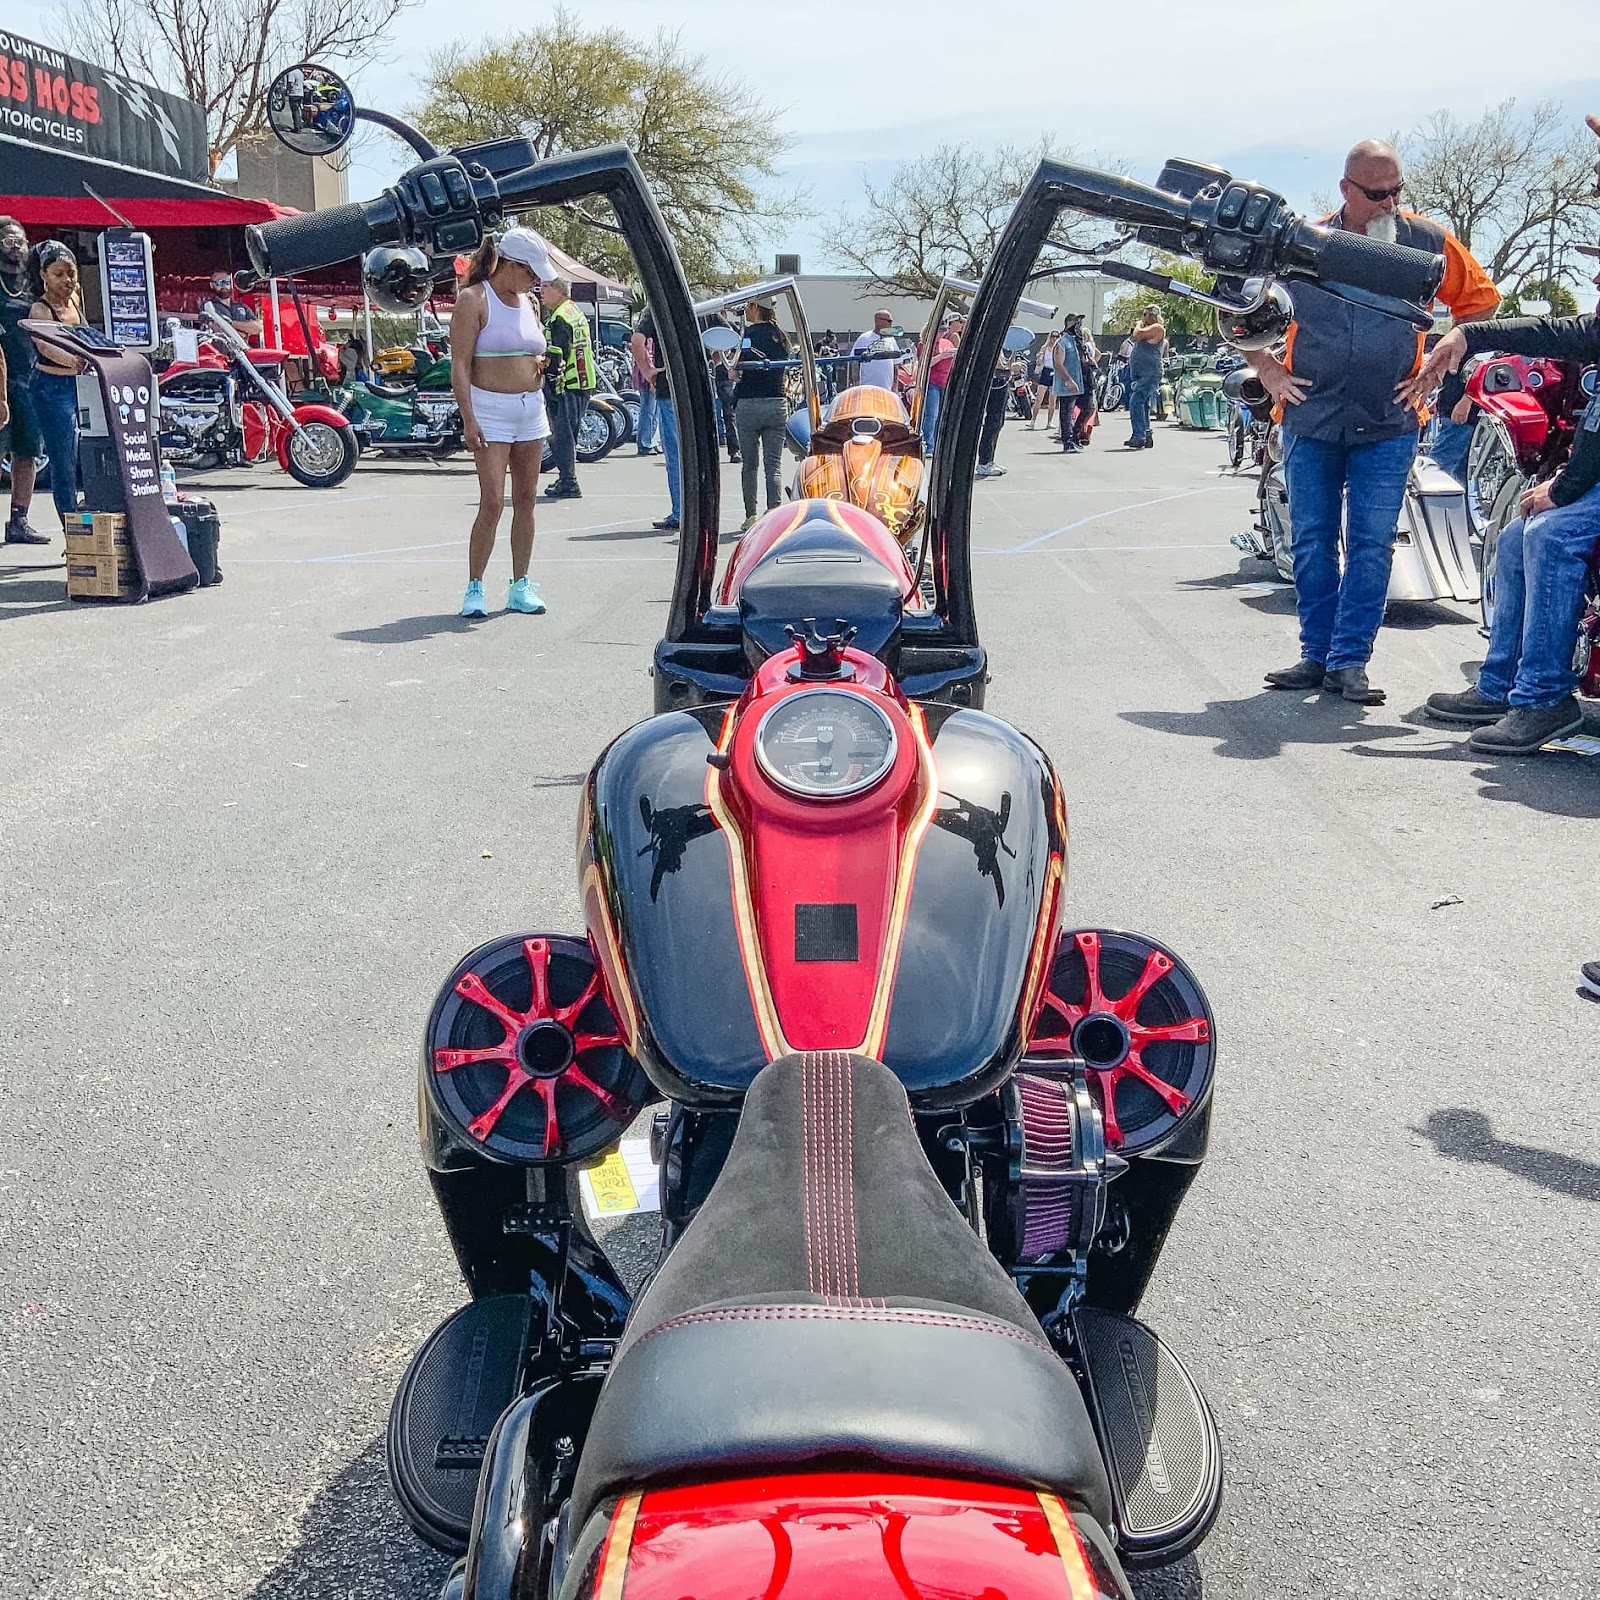 A rider point of view of a red chopper, with high handlebars and speaker sound systems installed by the foot pegs.